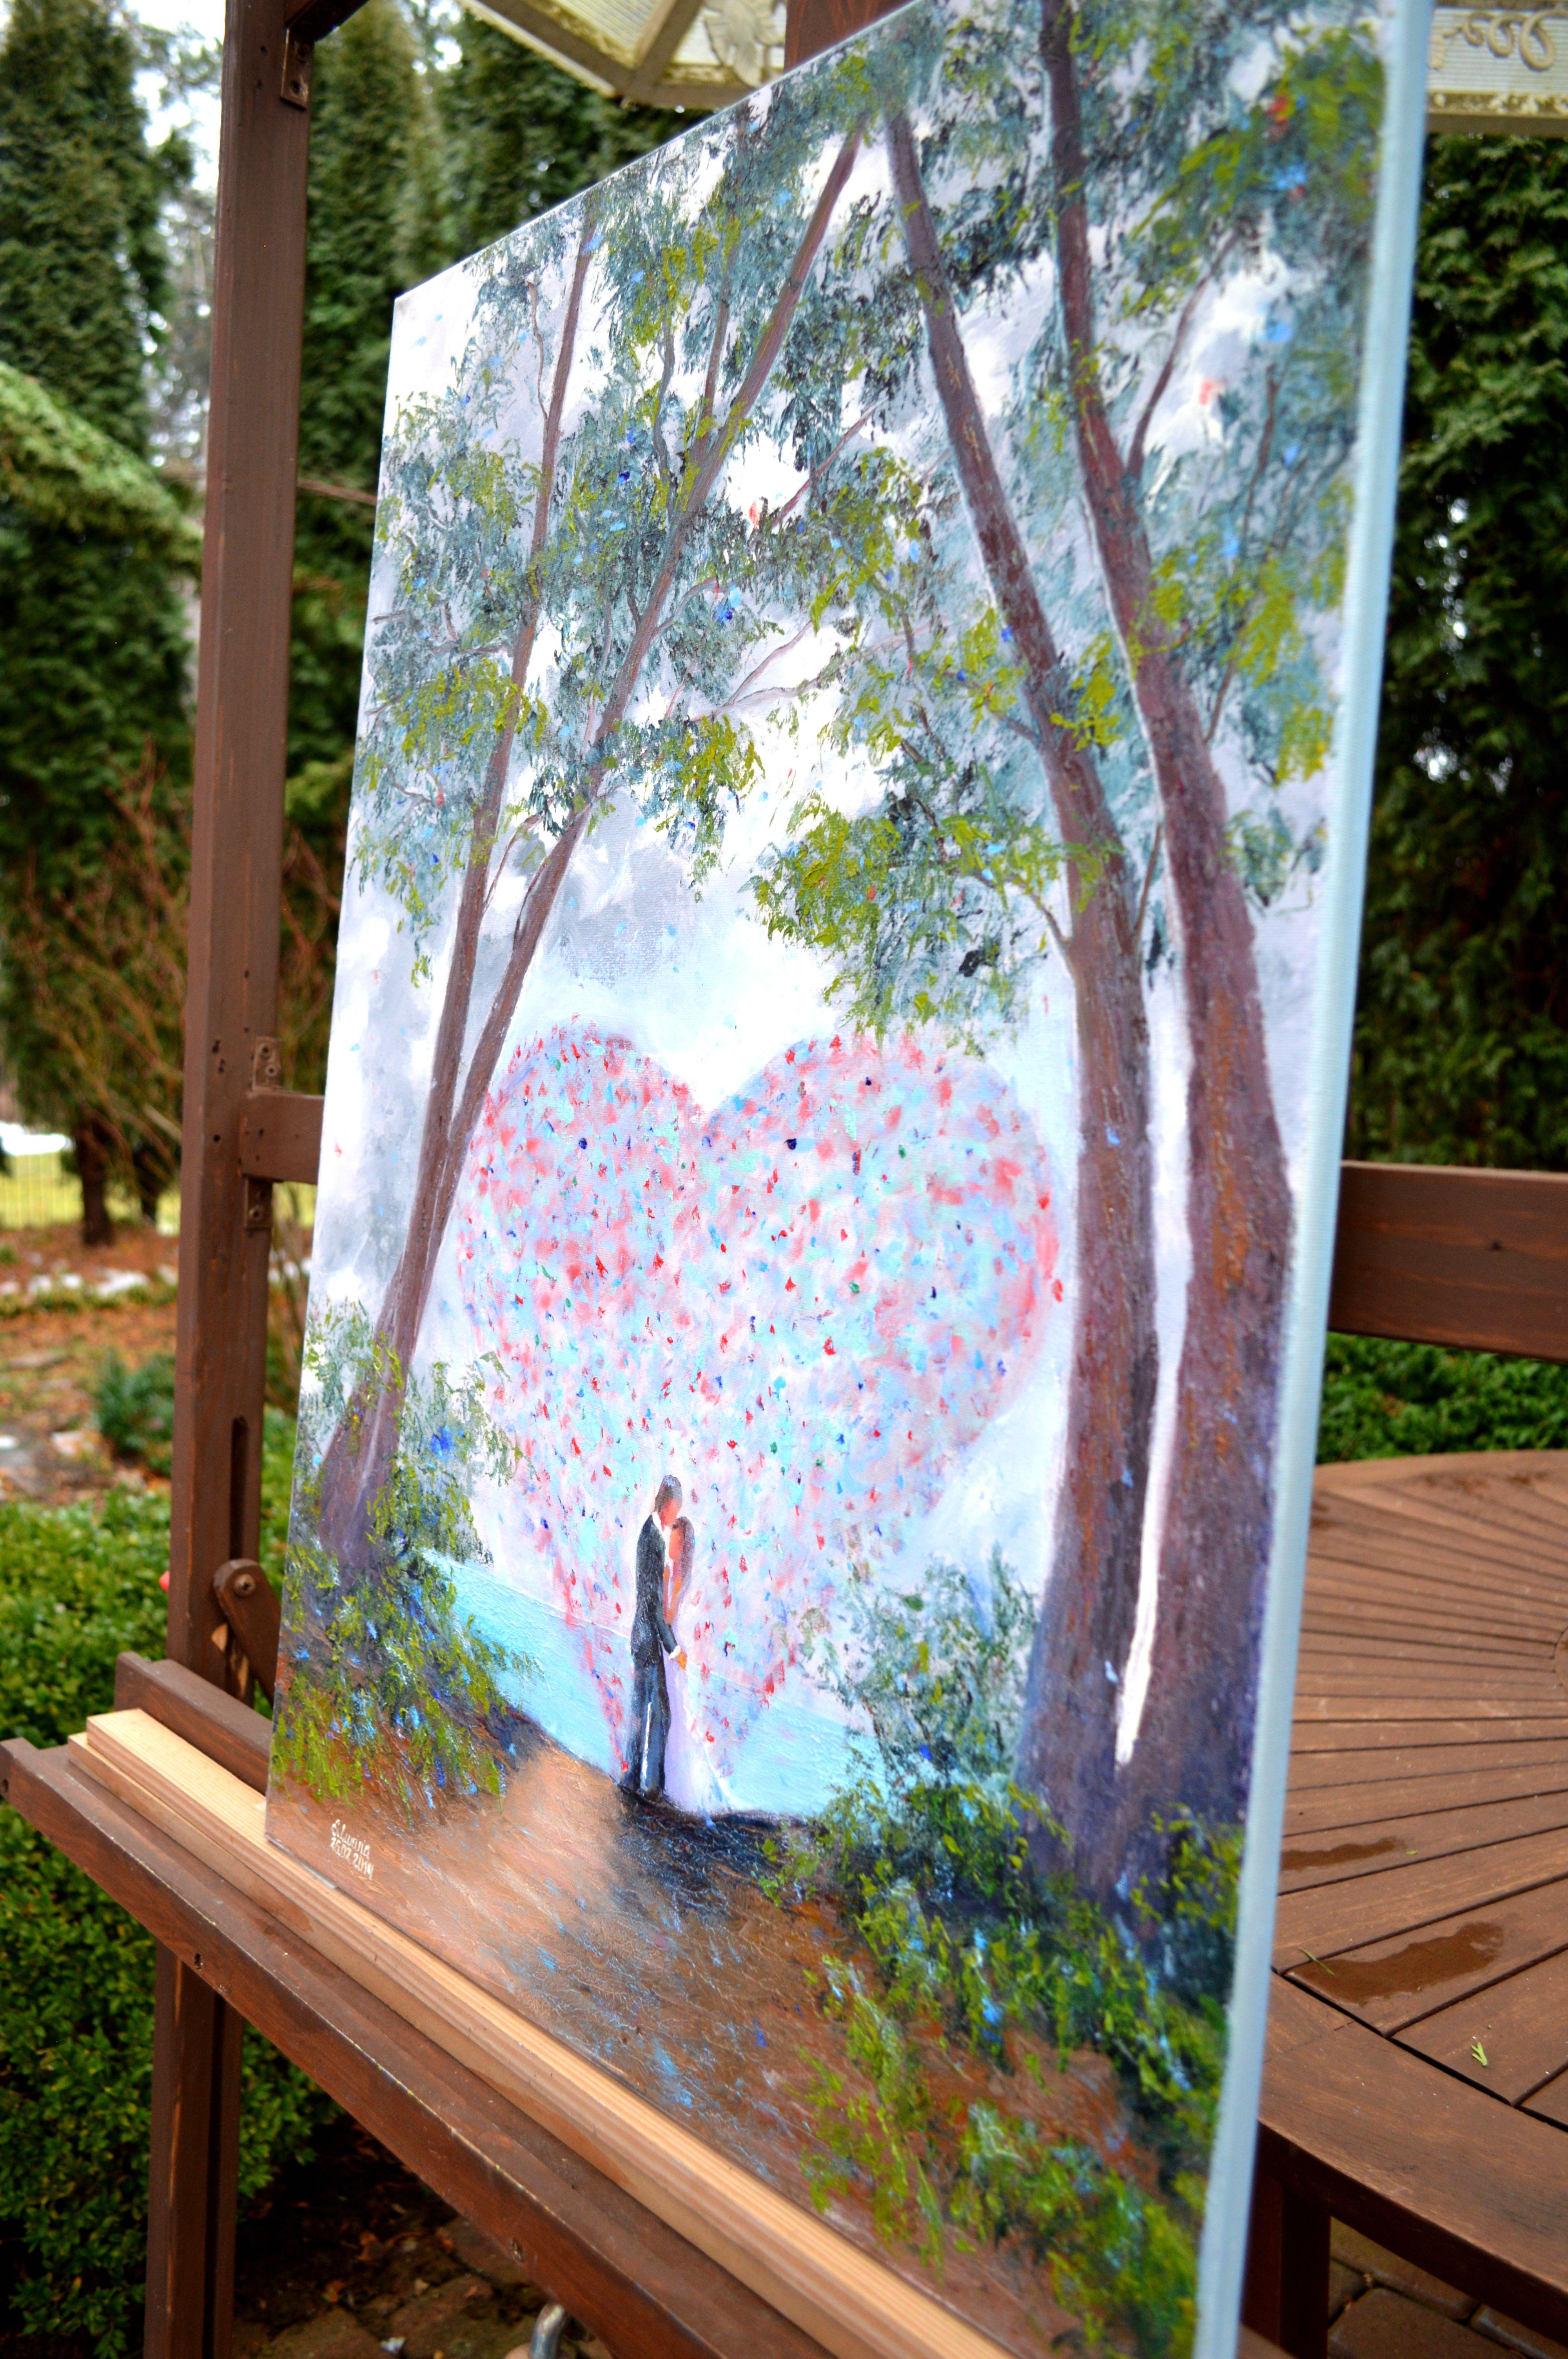 Romantic heart. Valentine. Love.
With each brushstroke, I captured an ephemeral moment of love and connection. The forest, symbolic of life's complexities, frames a couple enfolded in a tender embrace, the clear heart encircling them representing